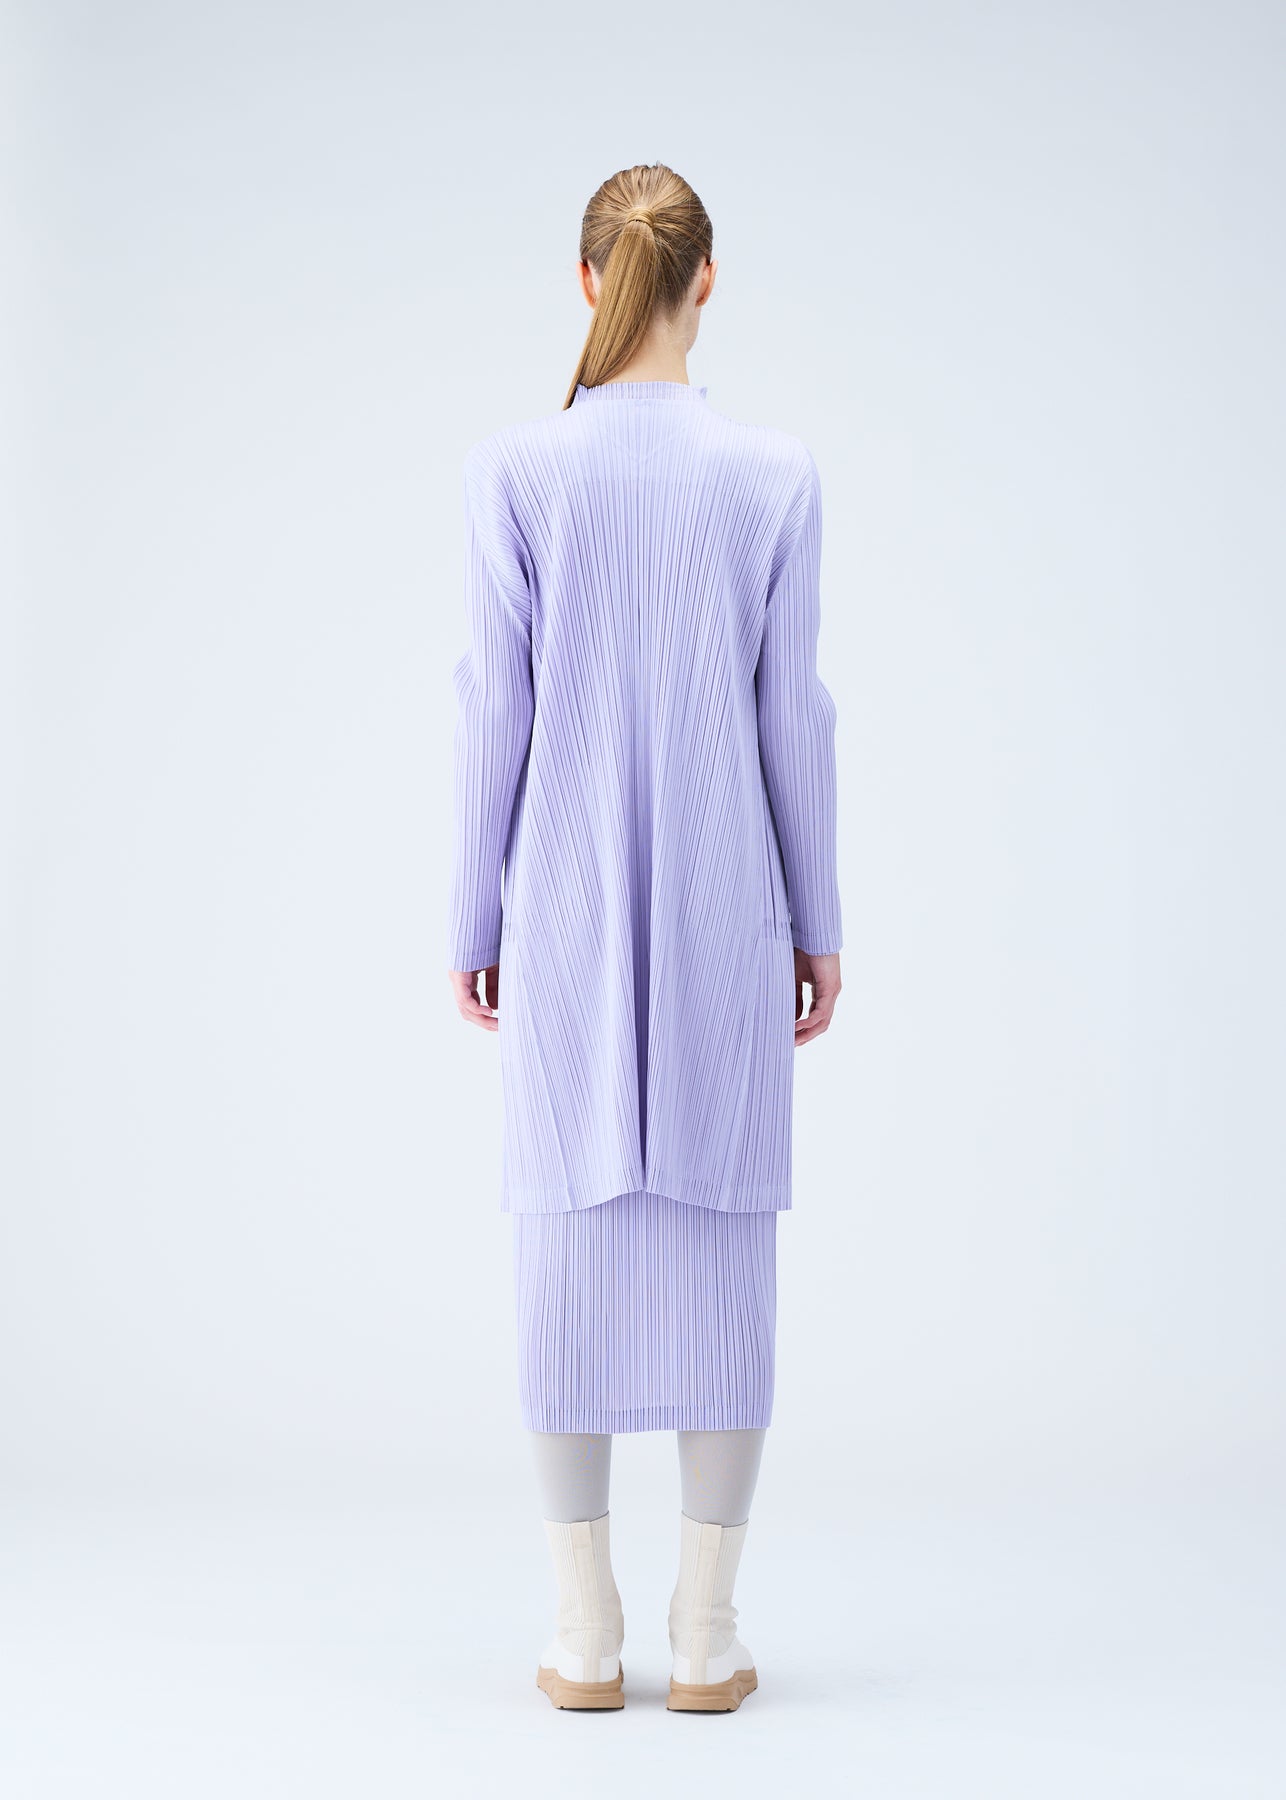 MONTHLY COLORS : OCTOBER COAT | The official ISSEY MIYAKE ONLINE